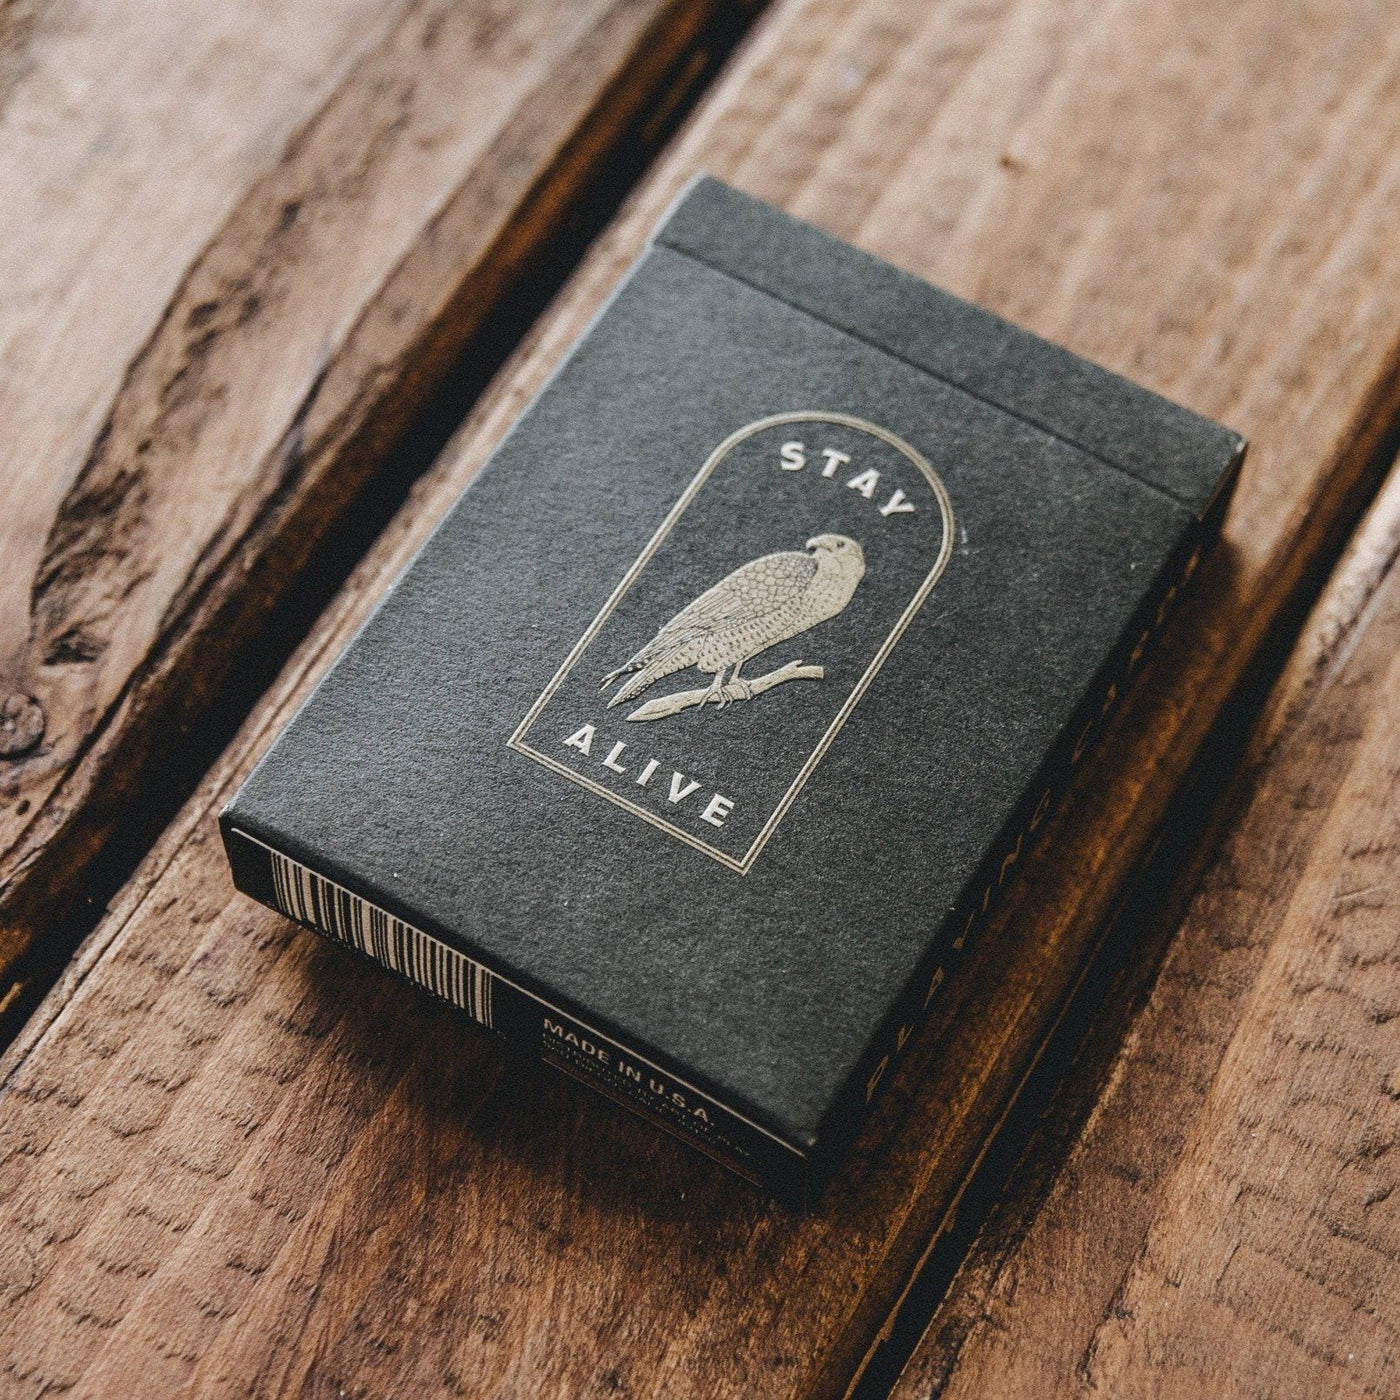 Bradley Mountain - Survival Playing Cards - Charcoal